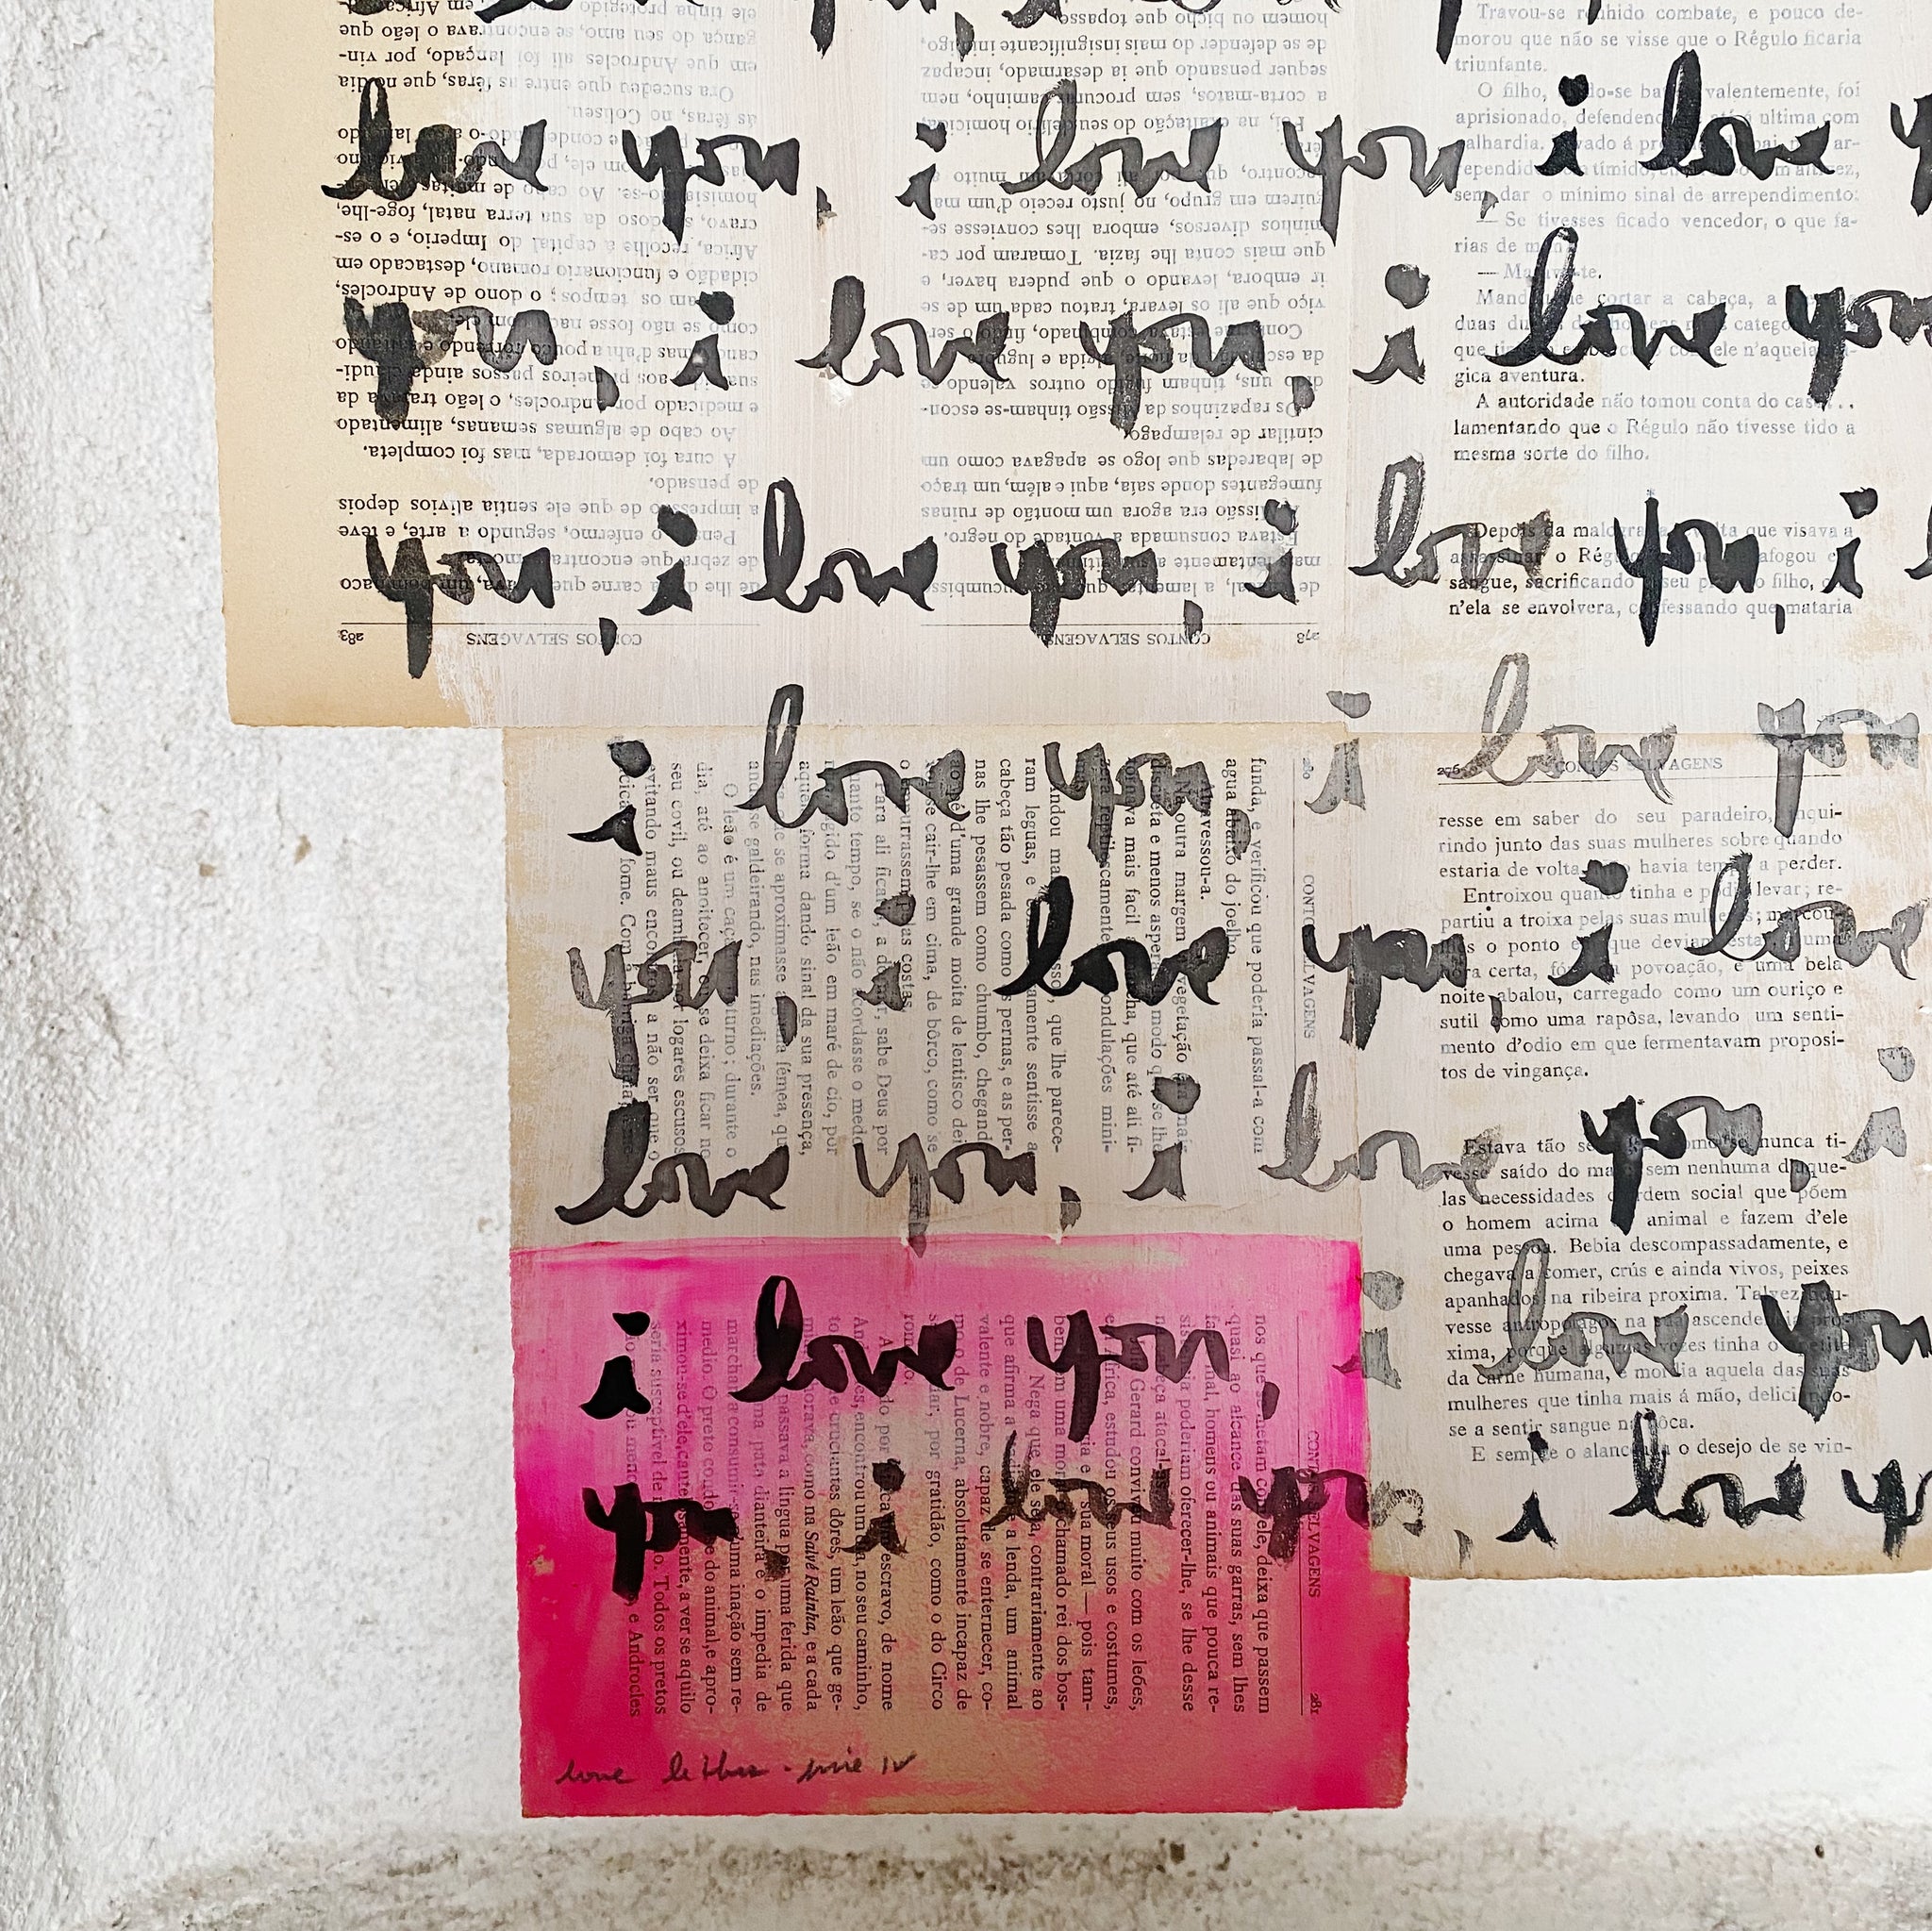 LOVE LETTERS - XMAS EDITION FLUO SQ I